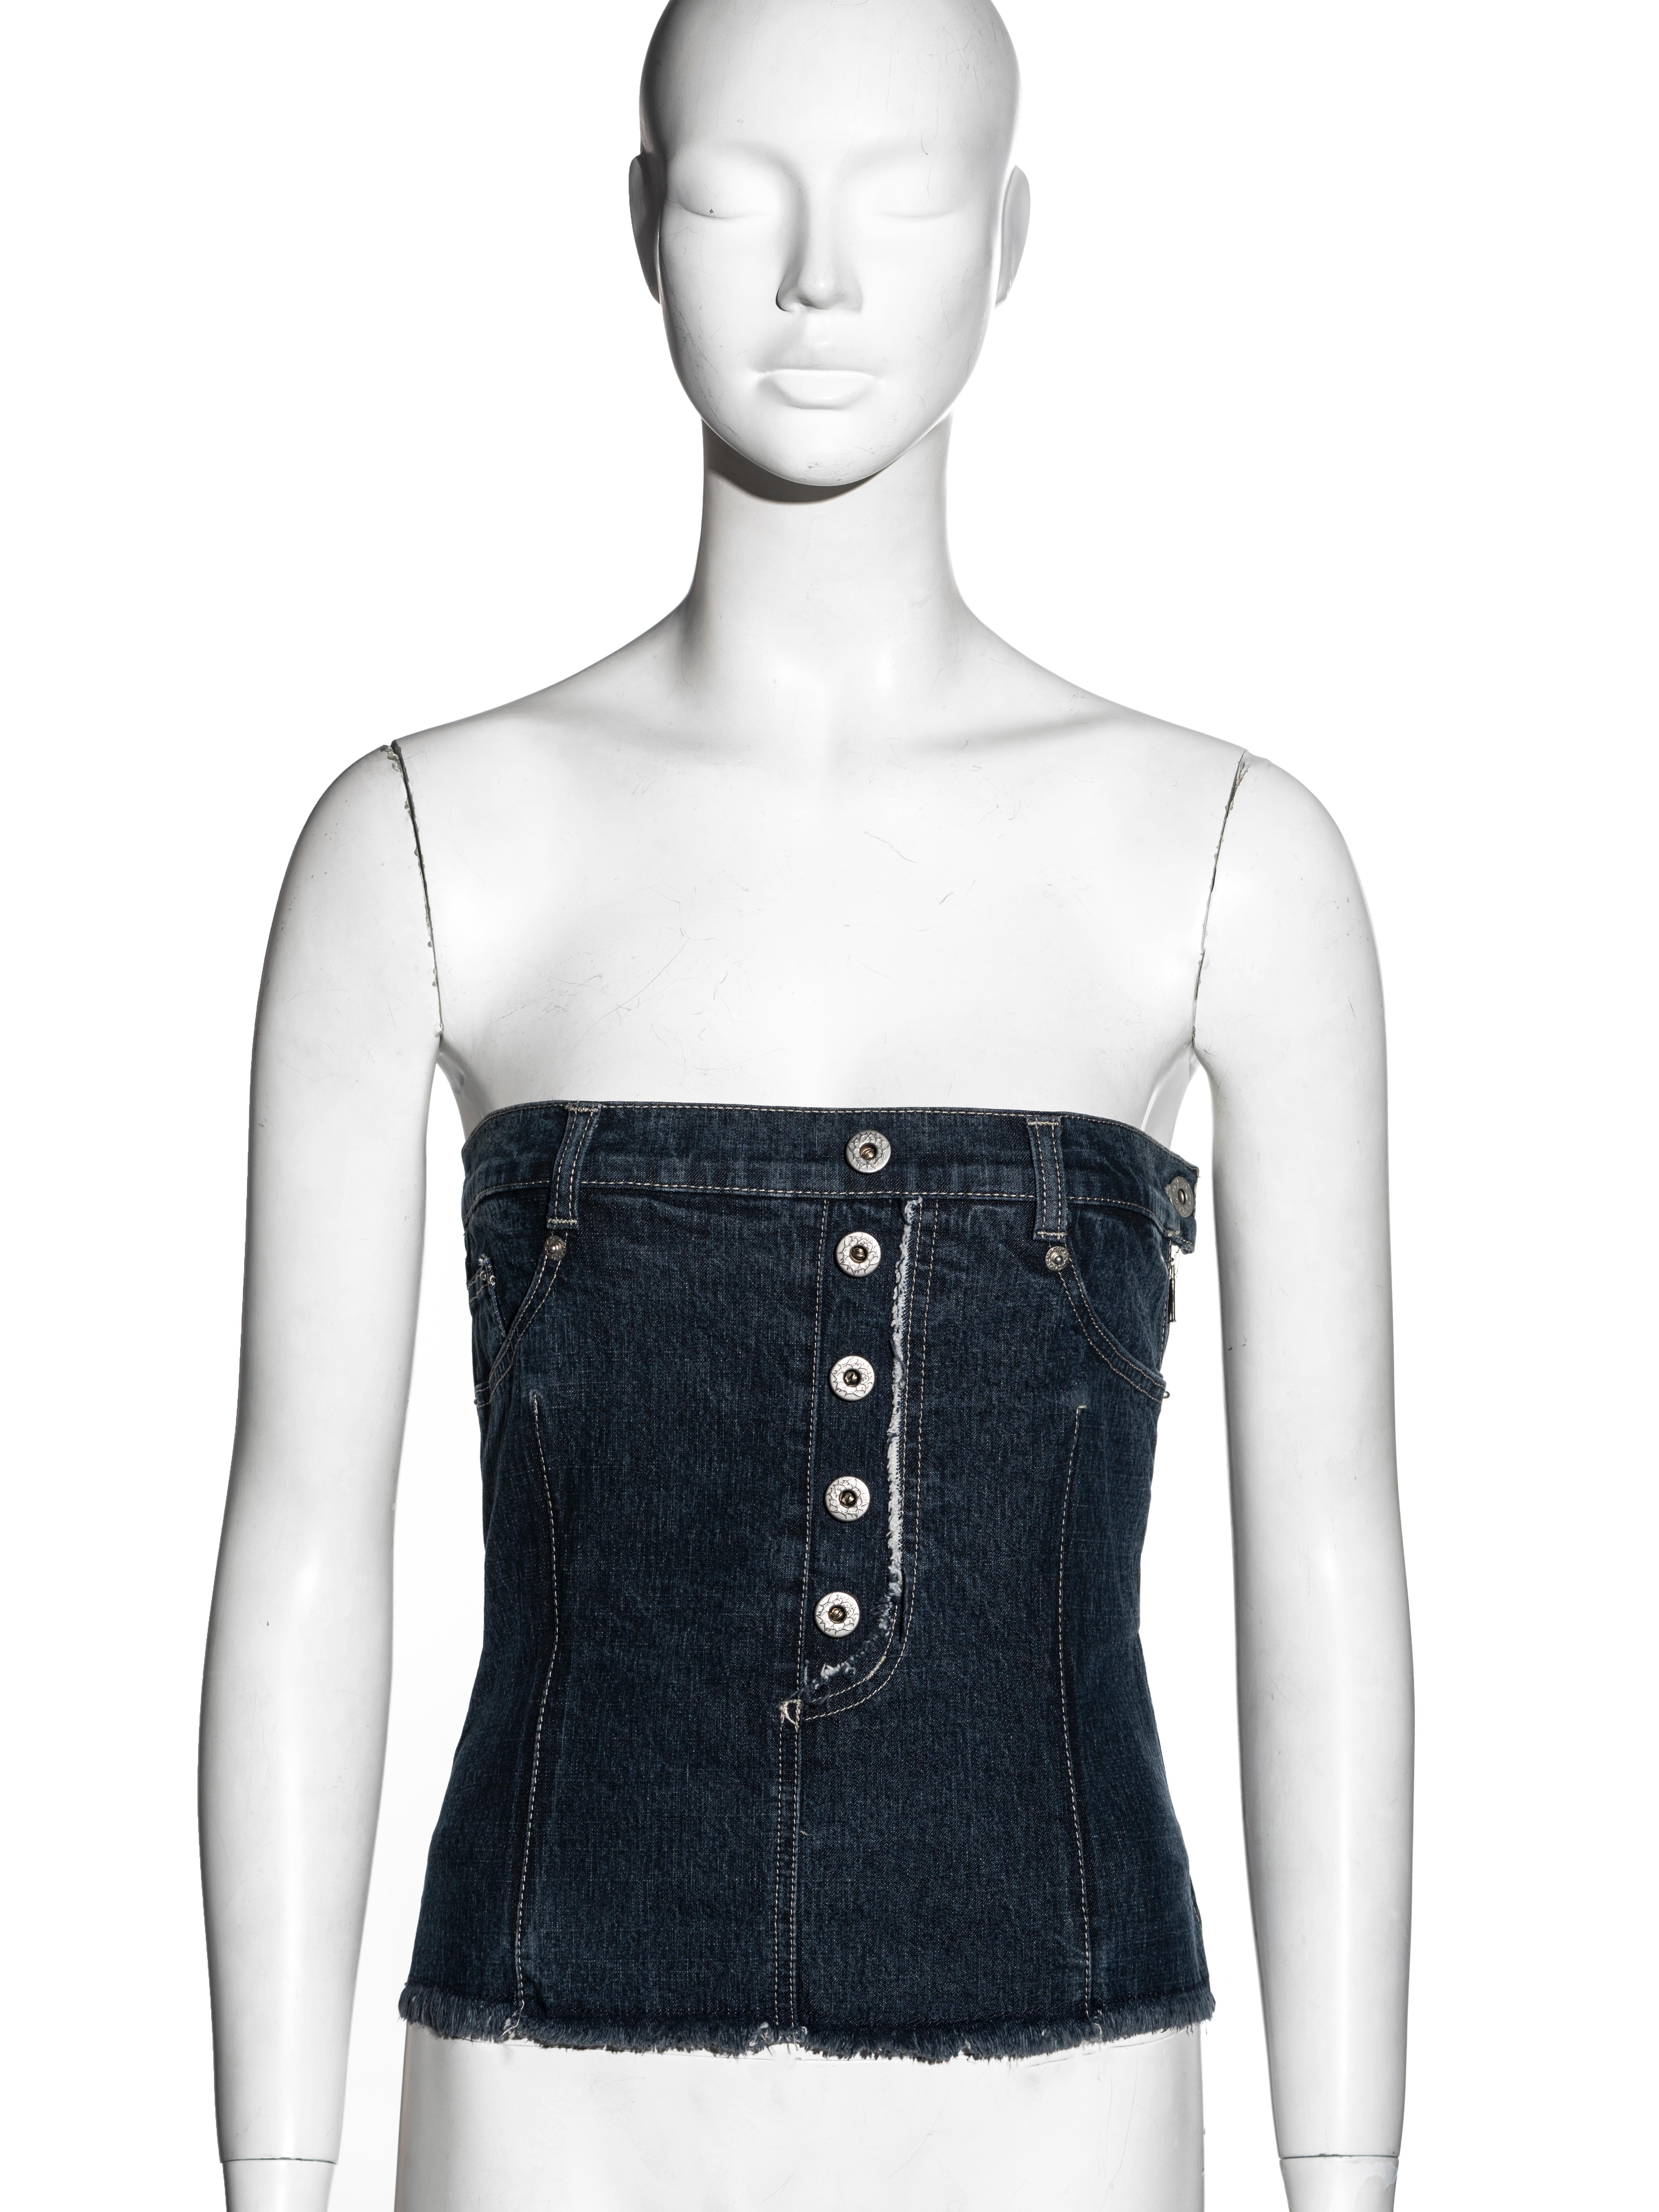 ▪ Alexander McQueen strapless corset top
▪ Washed blue denim
▪ Metal donut buttons 
▪ Built-in boning 
▪ Metal zipper at side opening 
▪ Belt loops and faux pockets 
▪ IT 38 - FR 34 - UK 6
▪ Fall-Winter 1996
▪ 83% Cotton, 15% Polyamide, 2% Elastic